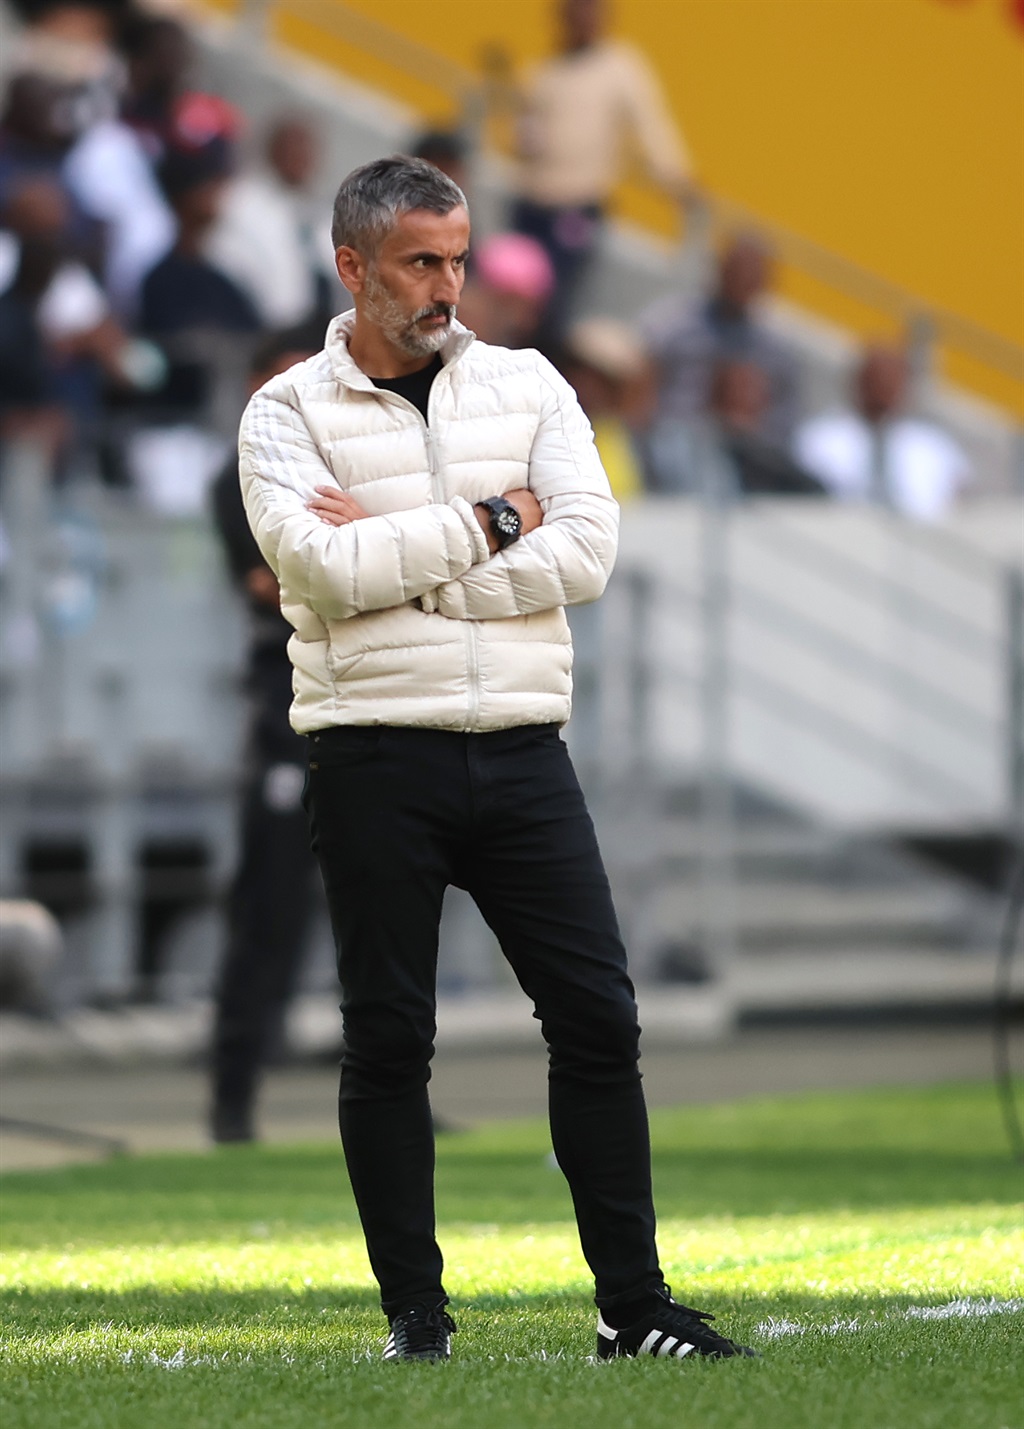 CAPE TOWN, SOUTH AFRICA - MAY 01: Orlando Pirates coach Jose Riveiro during the DStv Premiership match between Cape Town City FC and Orlando Pirates at DHL Cape Town Stadium on May 01, 2024 in Cape Town, South Africa. (Photo by Shaun Roy/Gallo Images)